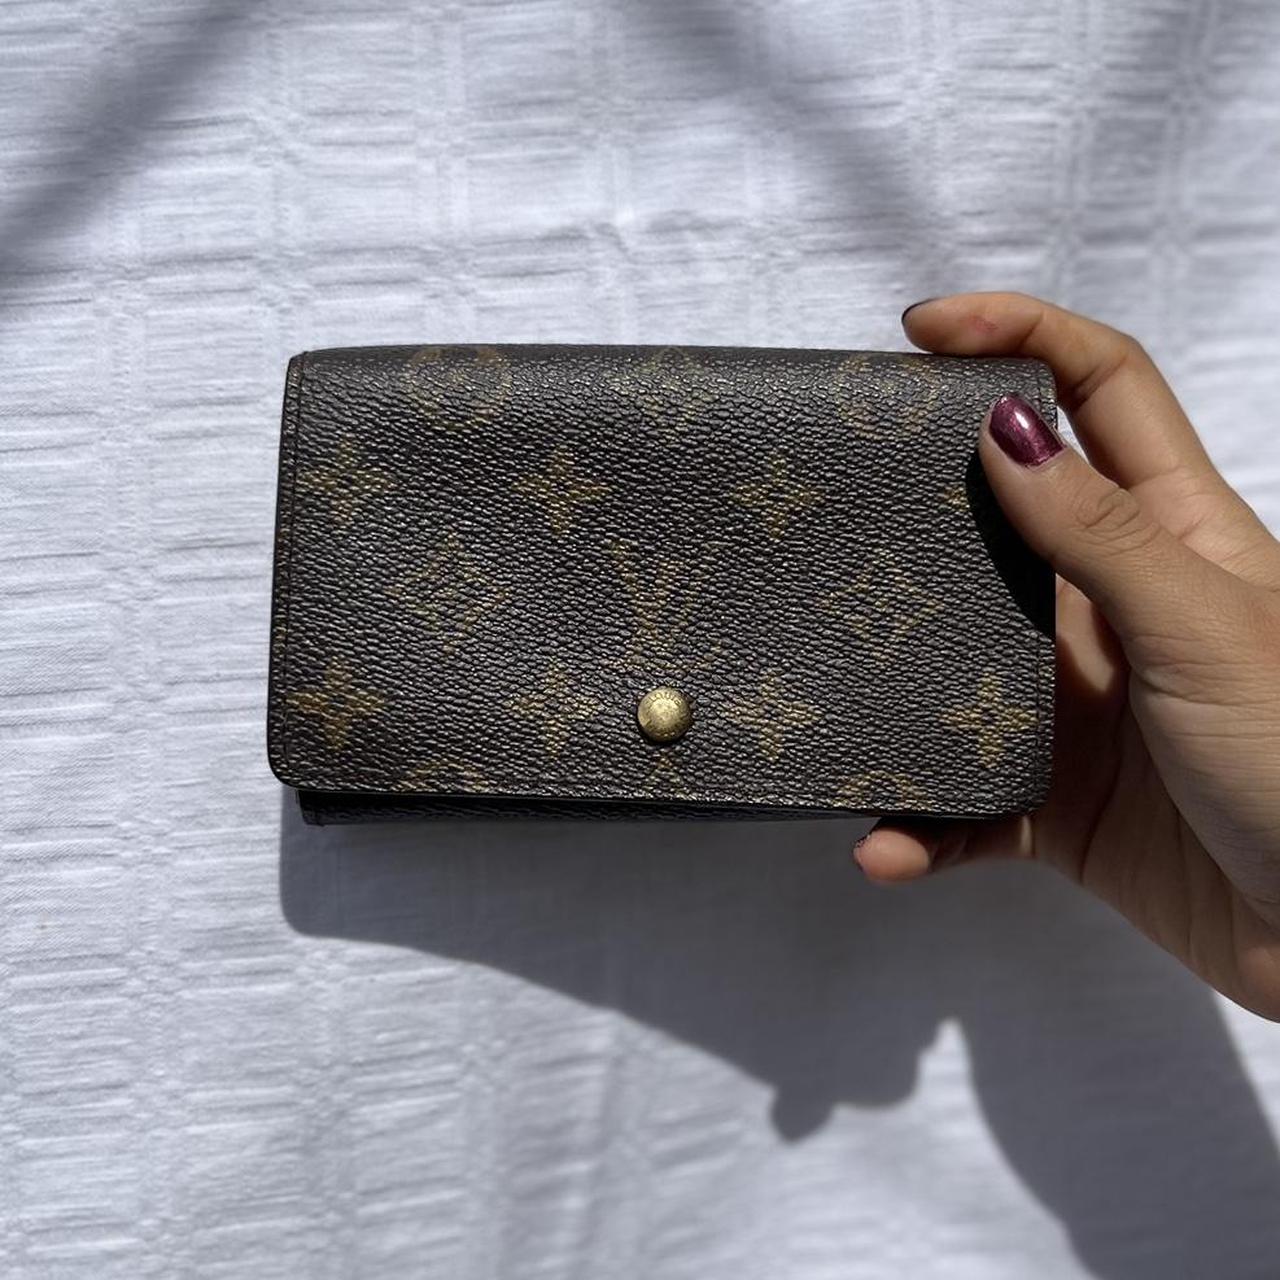 AUTHENTIC Louis Vuitton Wallet - PreOwned